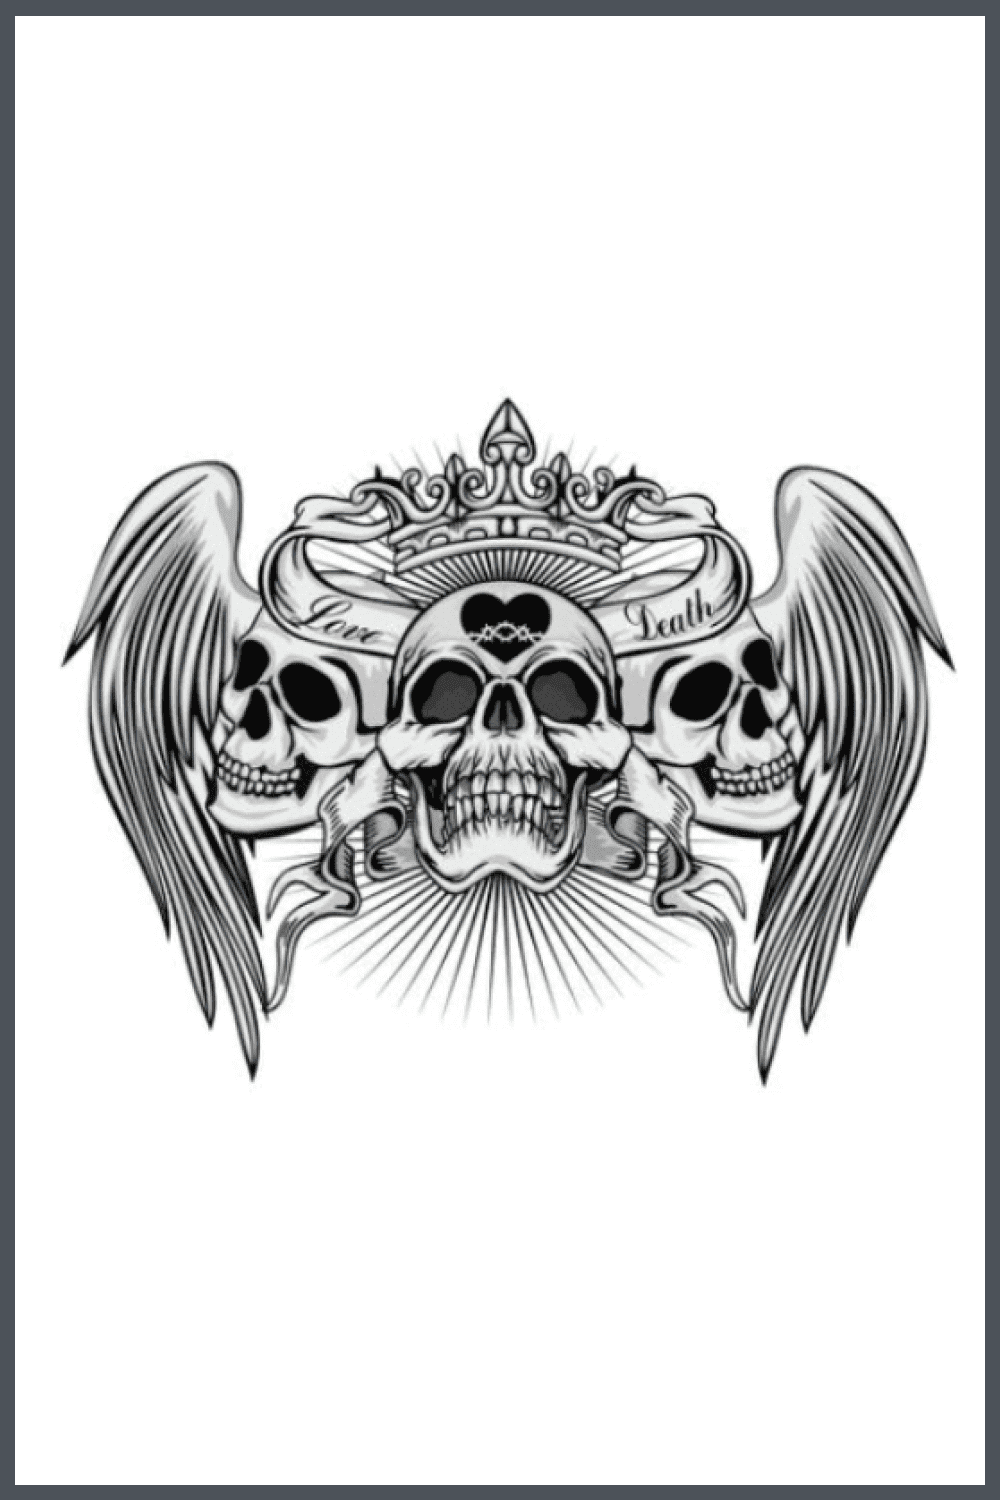 These are three skulls in black and white style that will look beautiful as a tattoo.